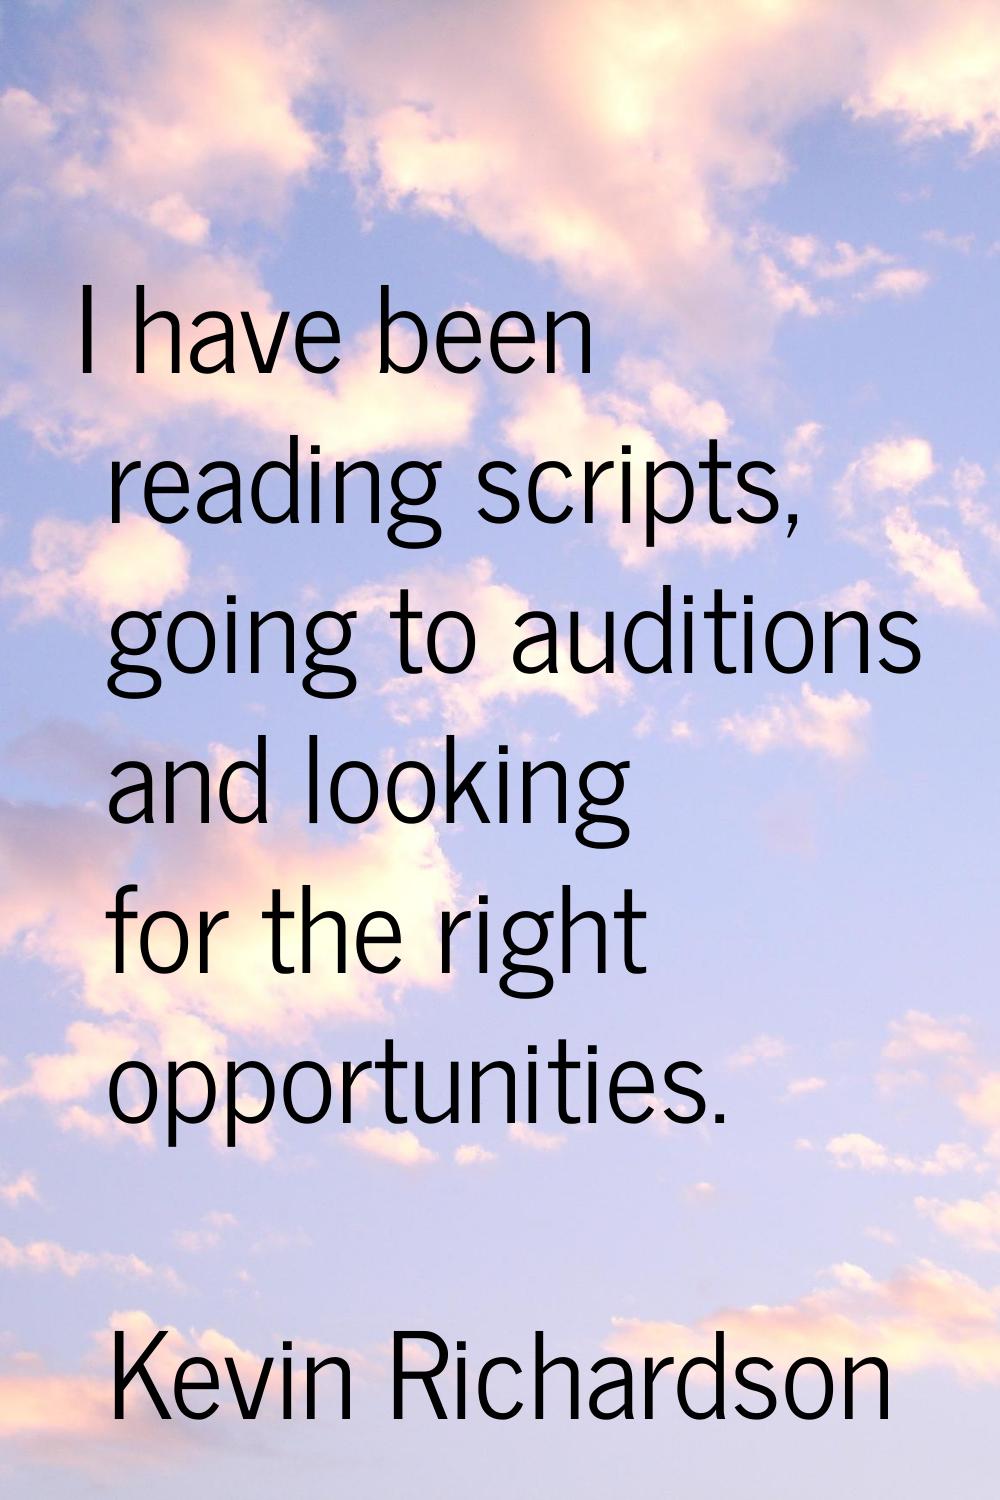 I have been reading scripts, going to auditions and looking for the right opportunities.